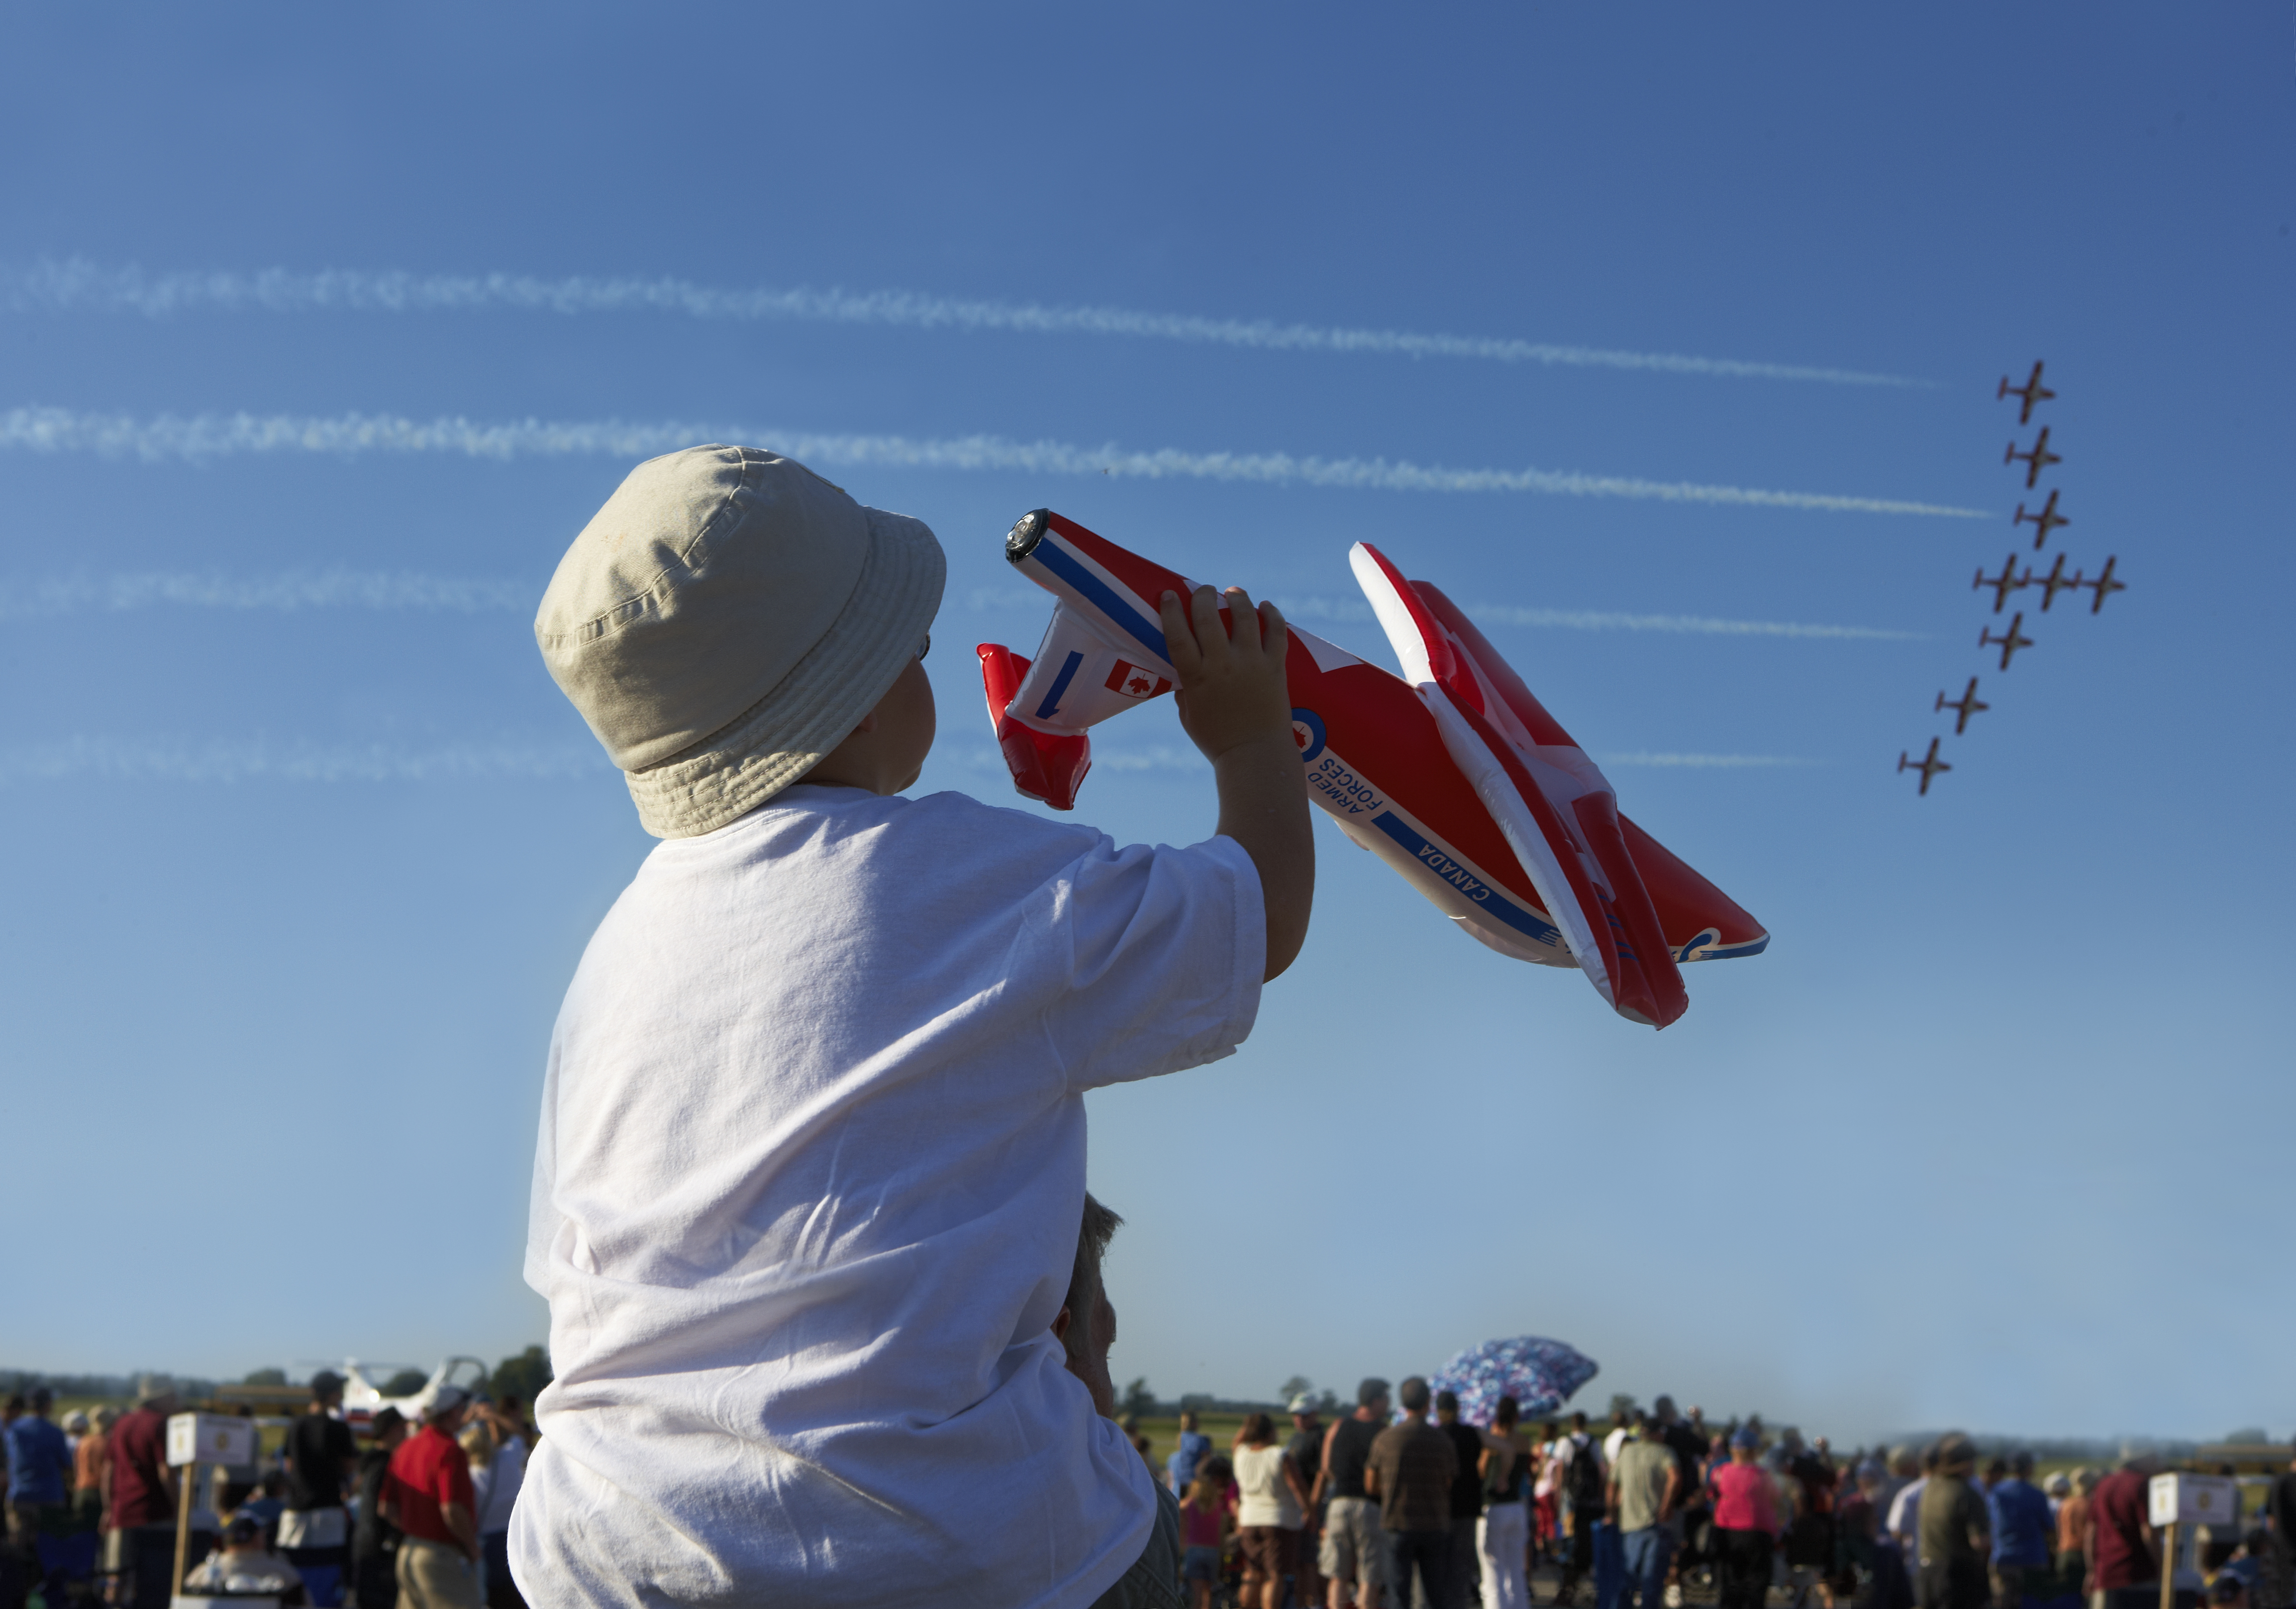 Small child watching planes airshow